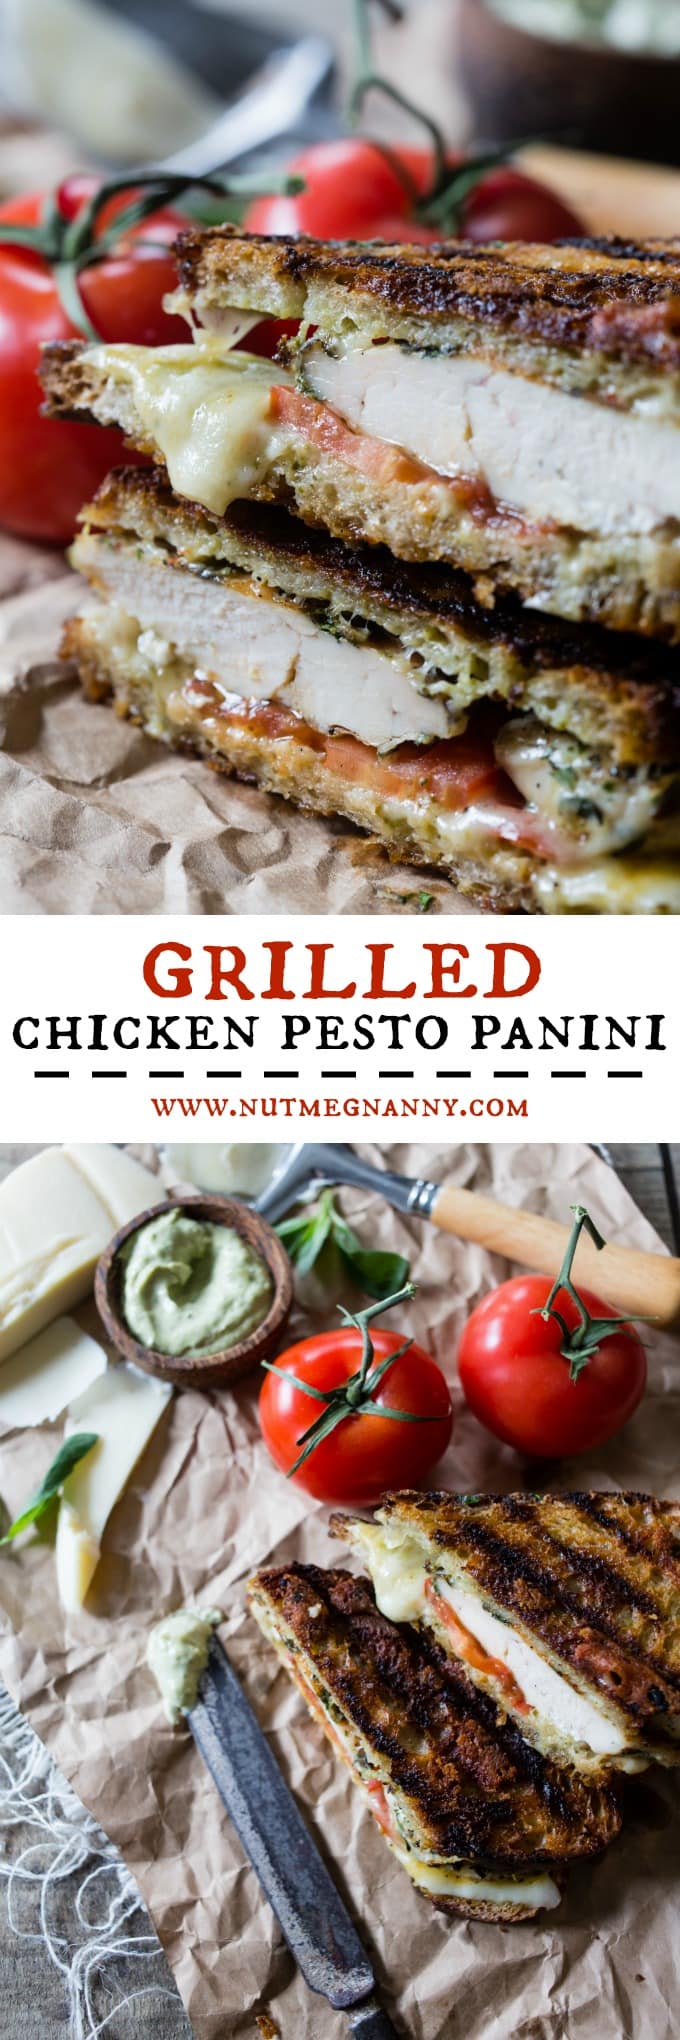 This grilled chicken pesto panini is a quick and easy weeknight meal. Made with grilled marinated chicken, sharp provolone cheese, pesto mayonnaise and ripe tomatoes. You'll love this sandwich so much you'll want to make it every single week! 